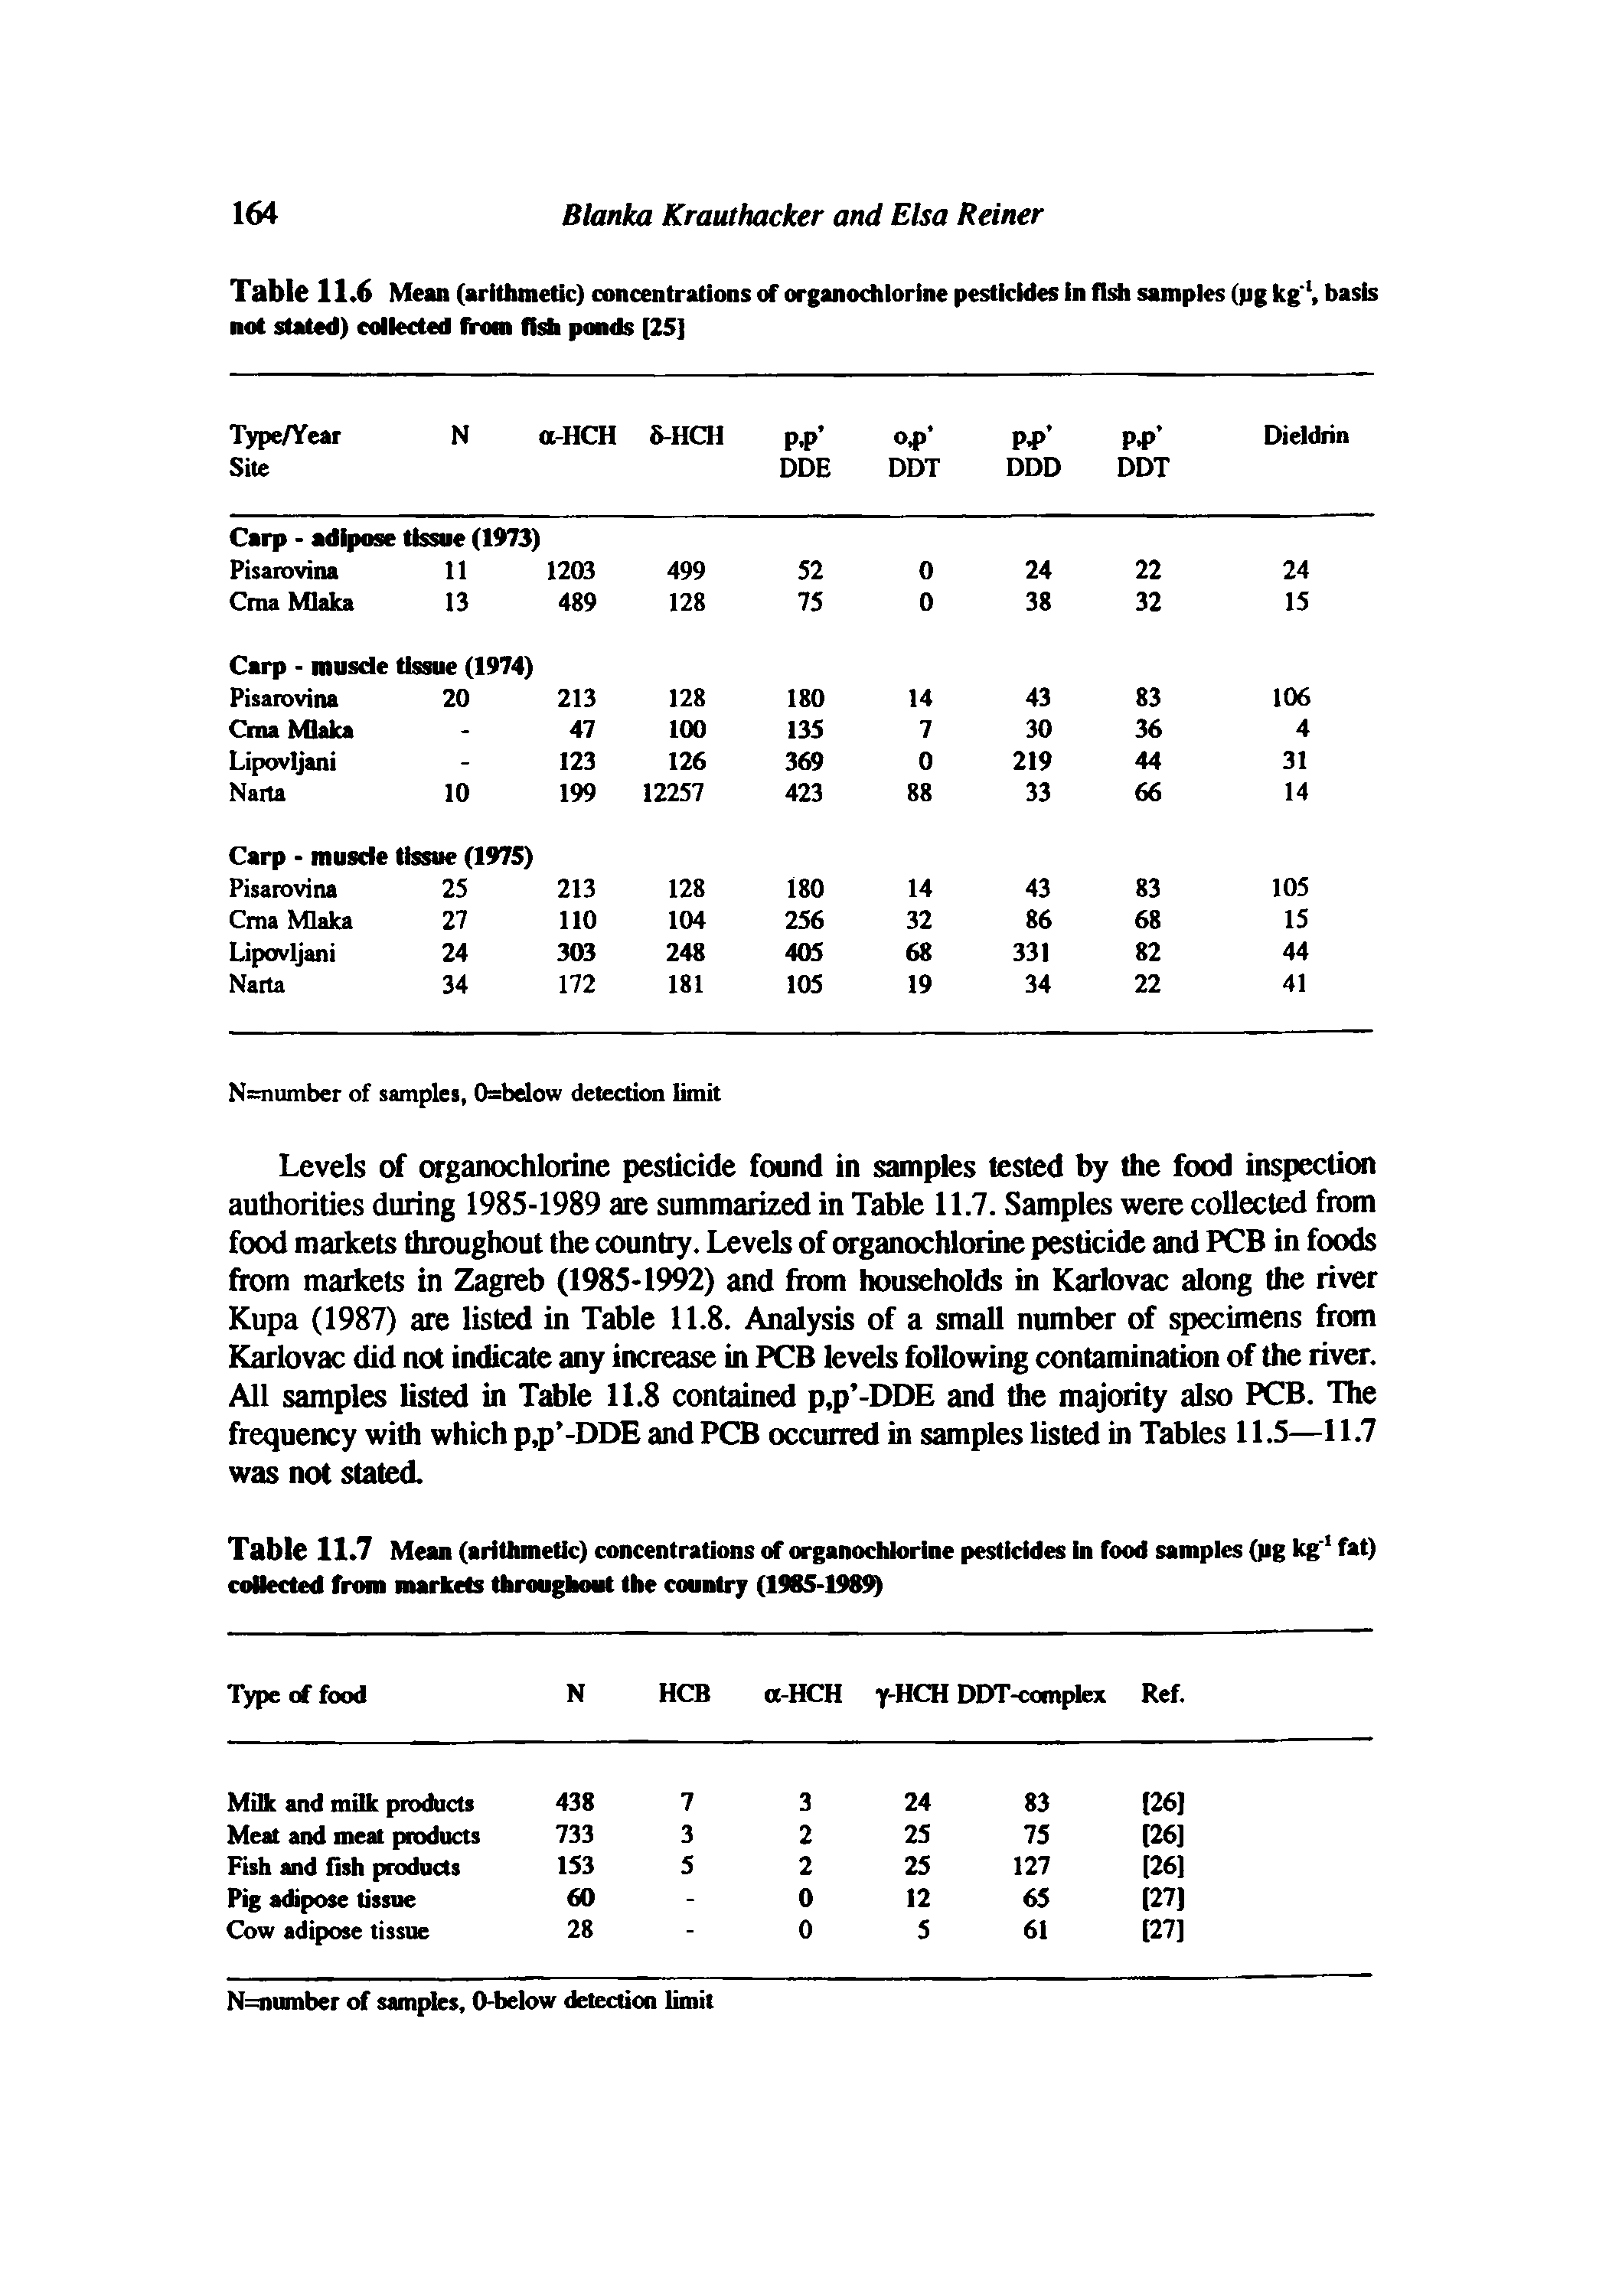 Table 11.6 Mean (arithmetic) concentrations of organochlorine pesticides in flsh sampies (pg kg, basis not stated) collected from fish ponds [25]...